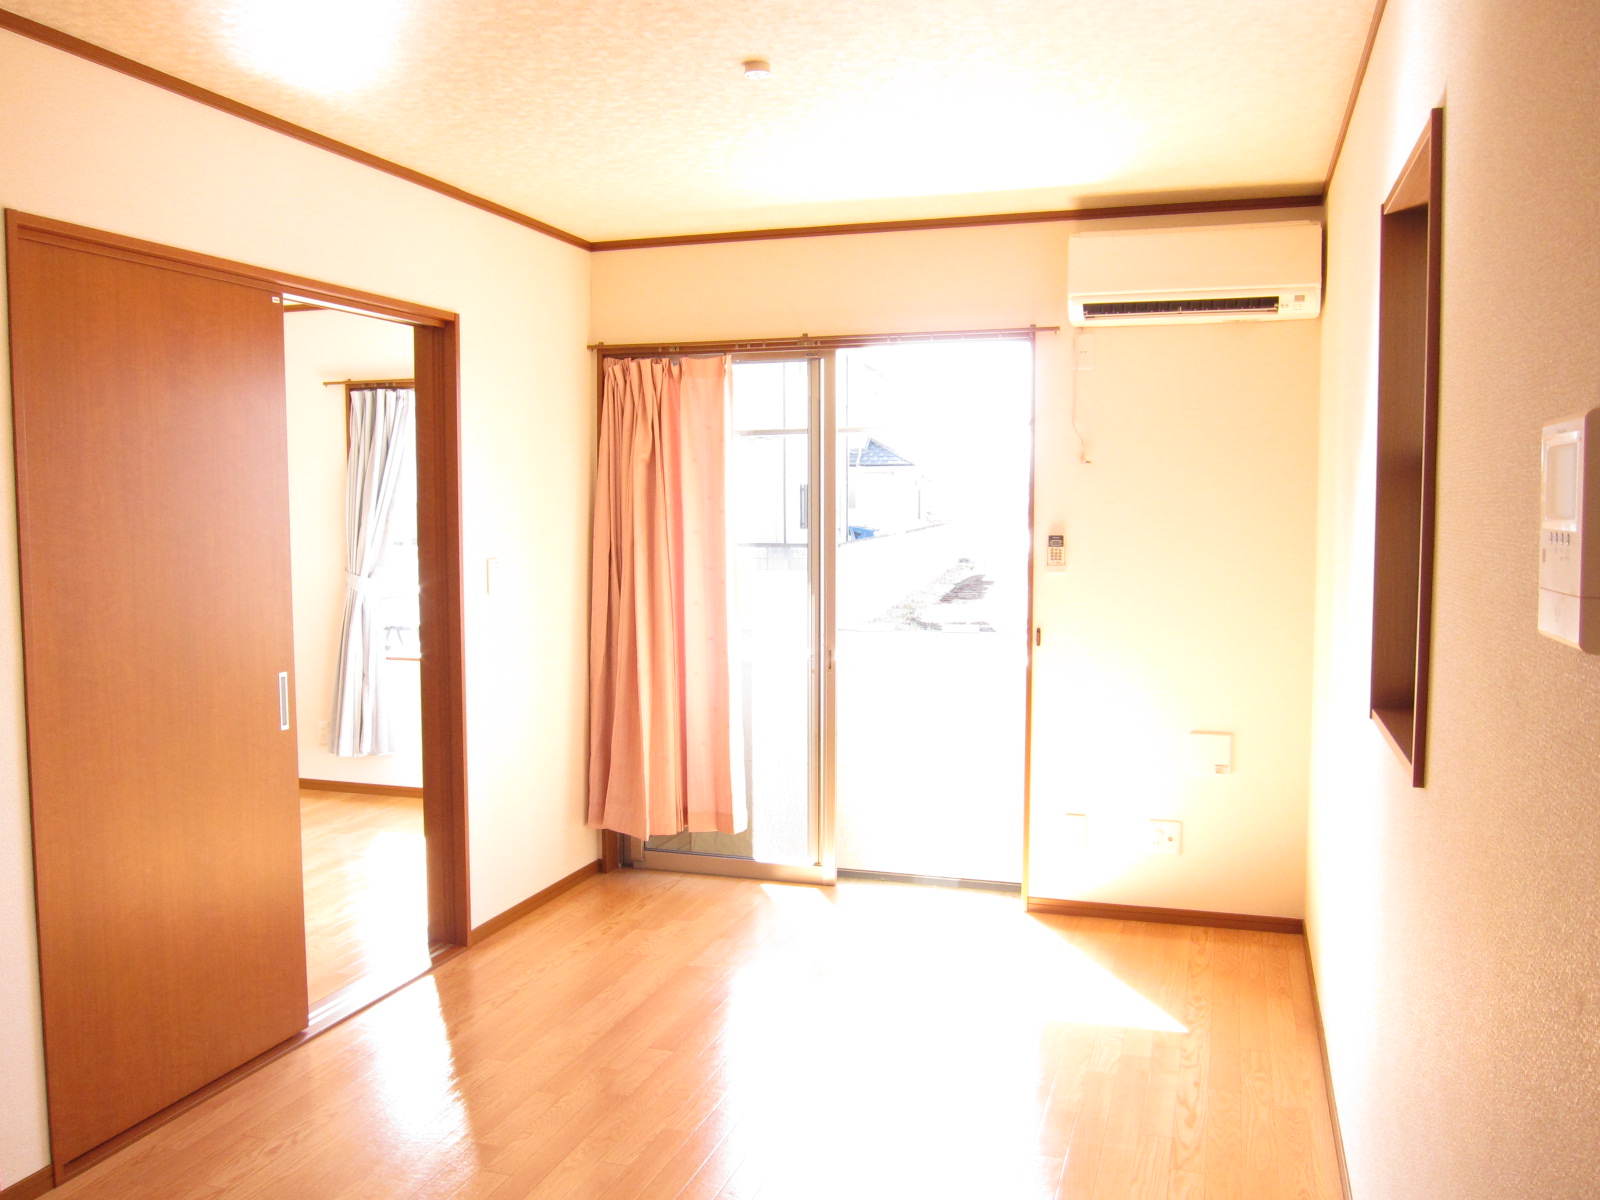 Living and room. Bright spacious LDK